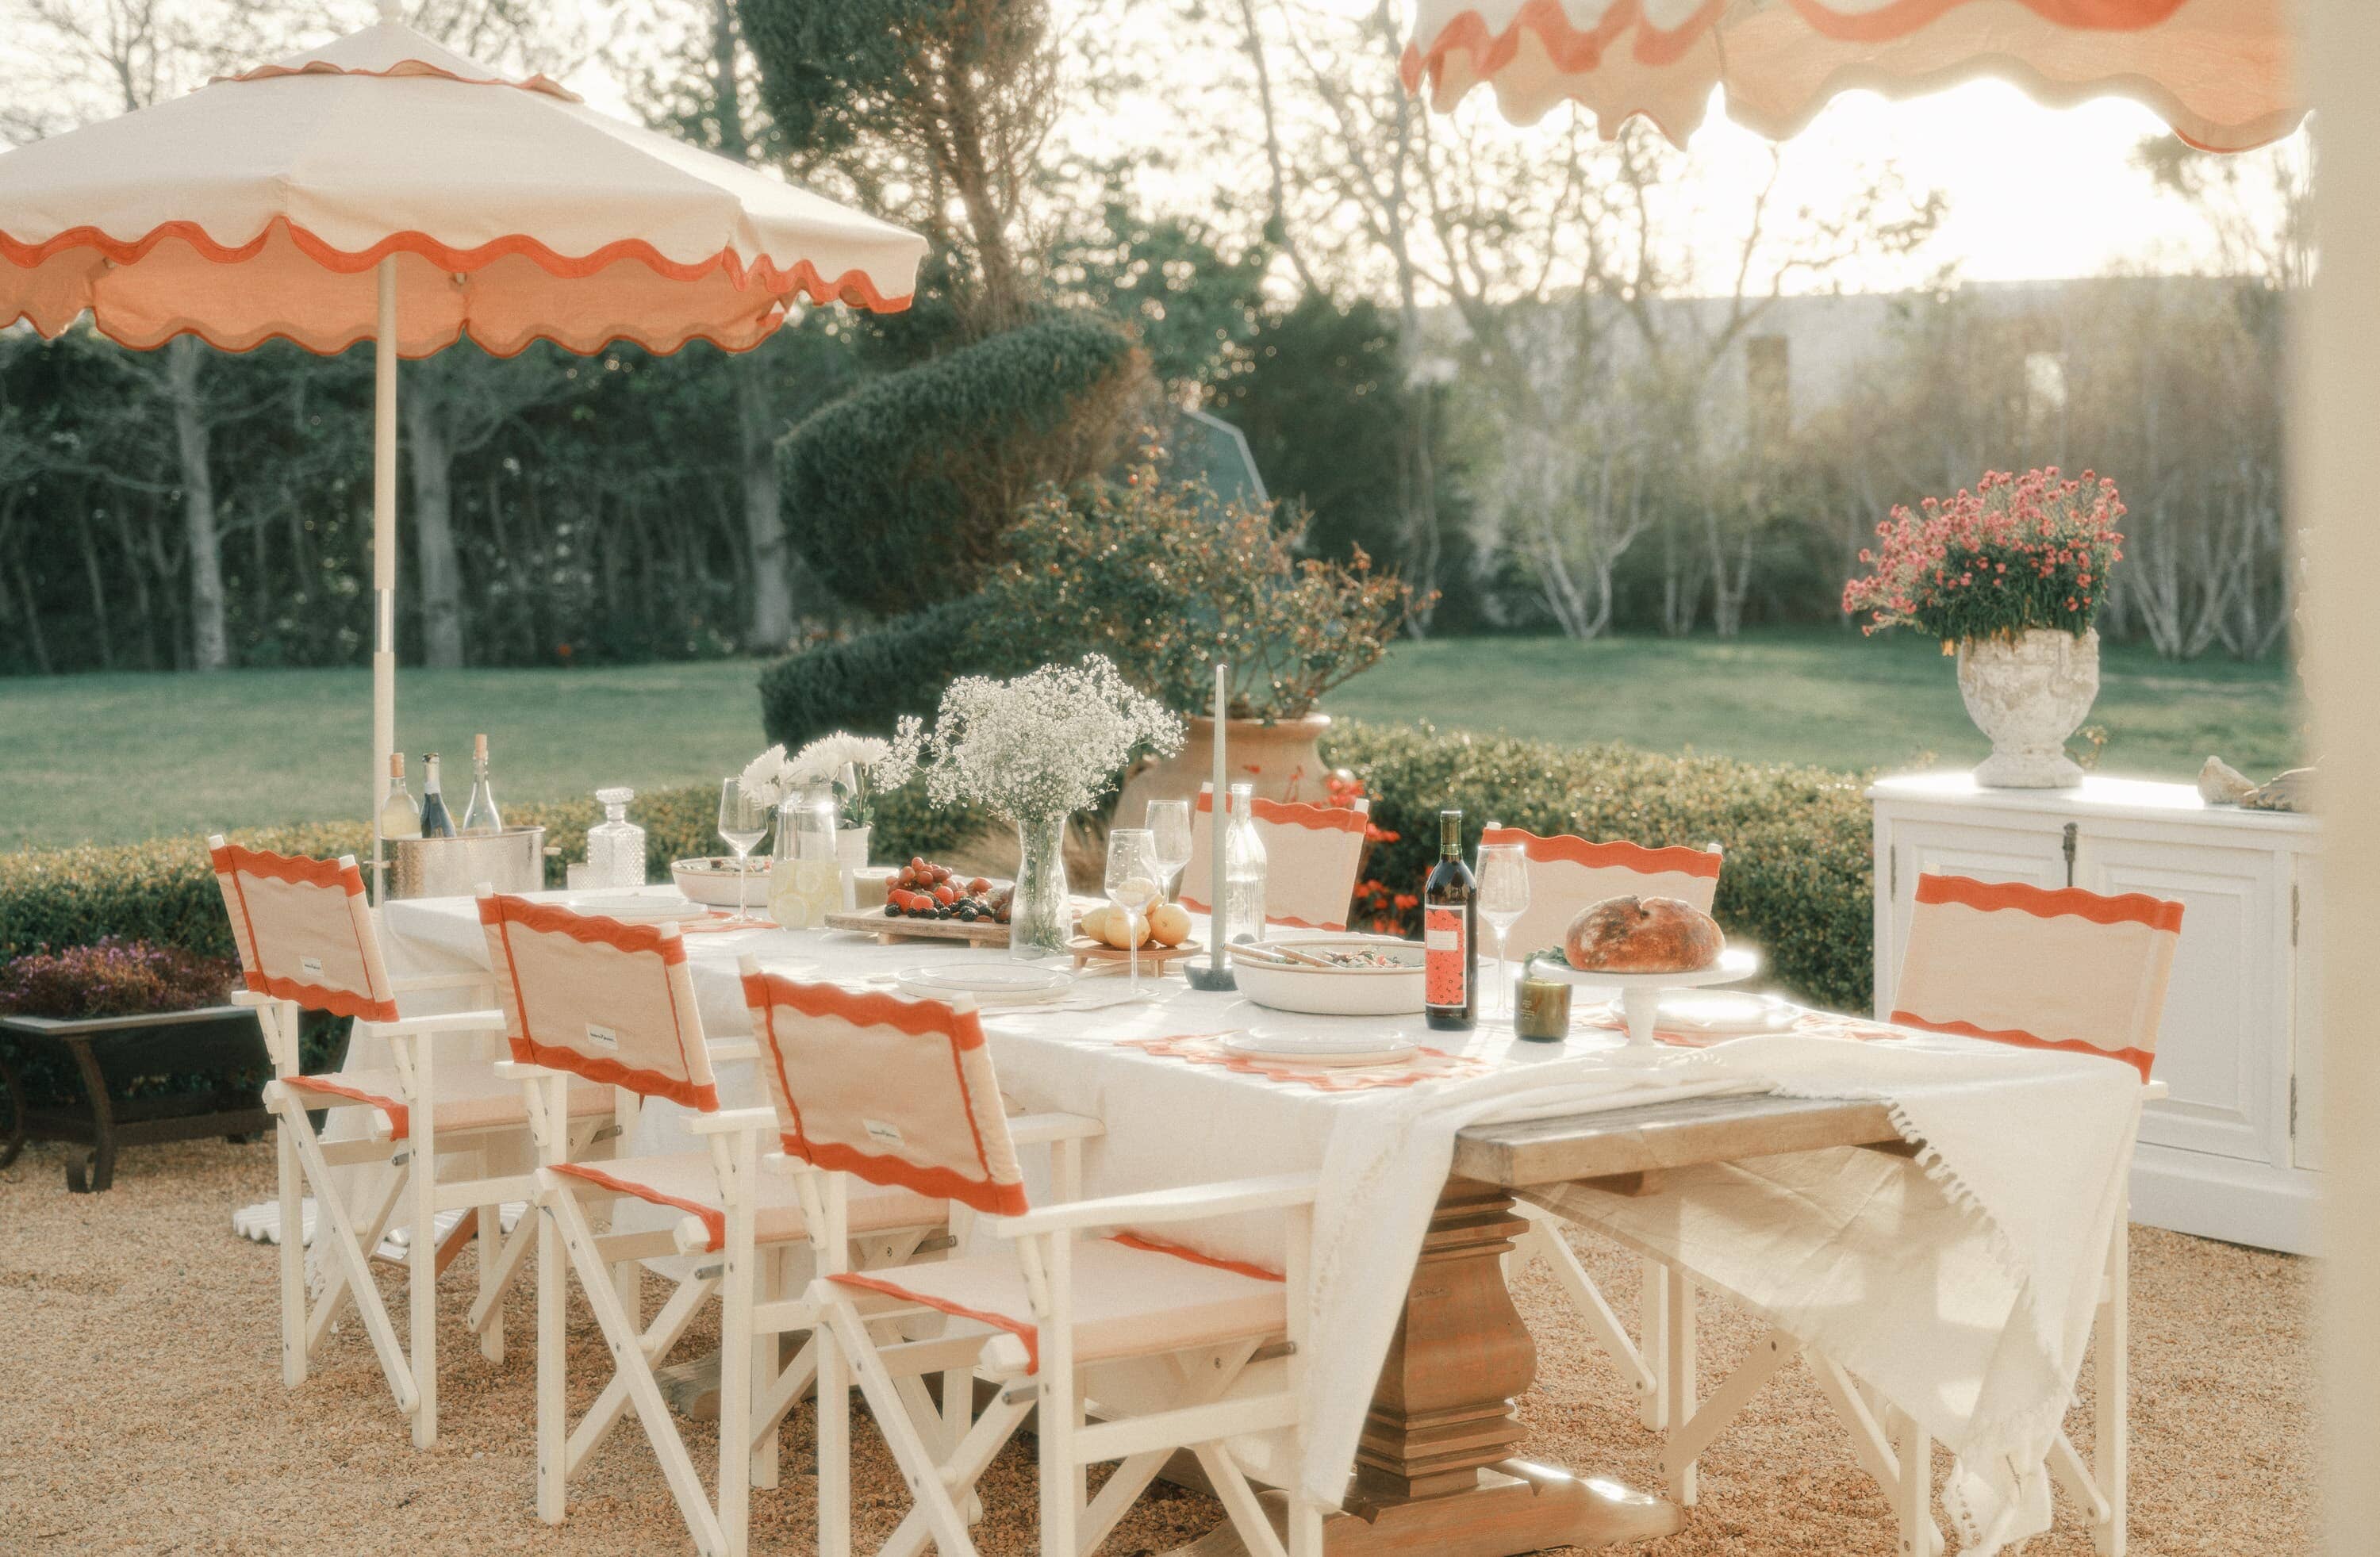 outdoor table setting with white table cloth and pink chairs & accessories